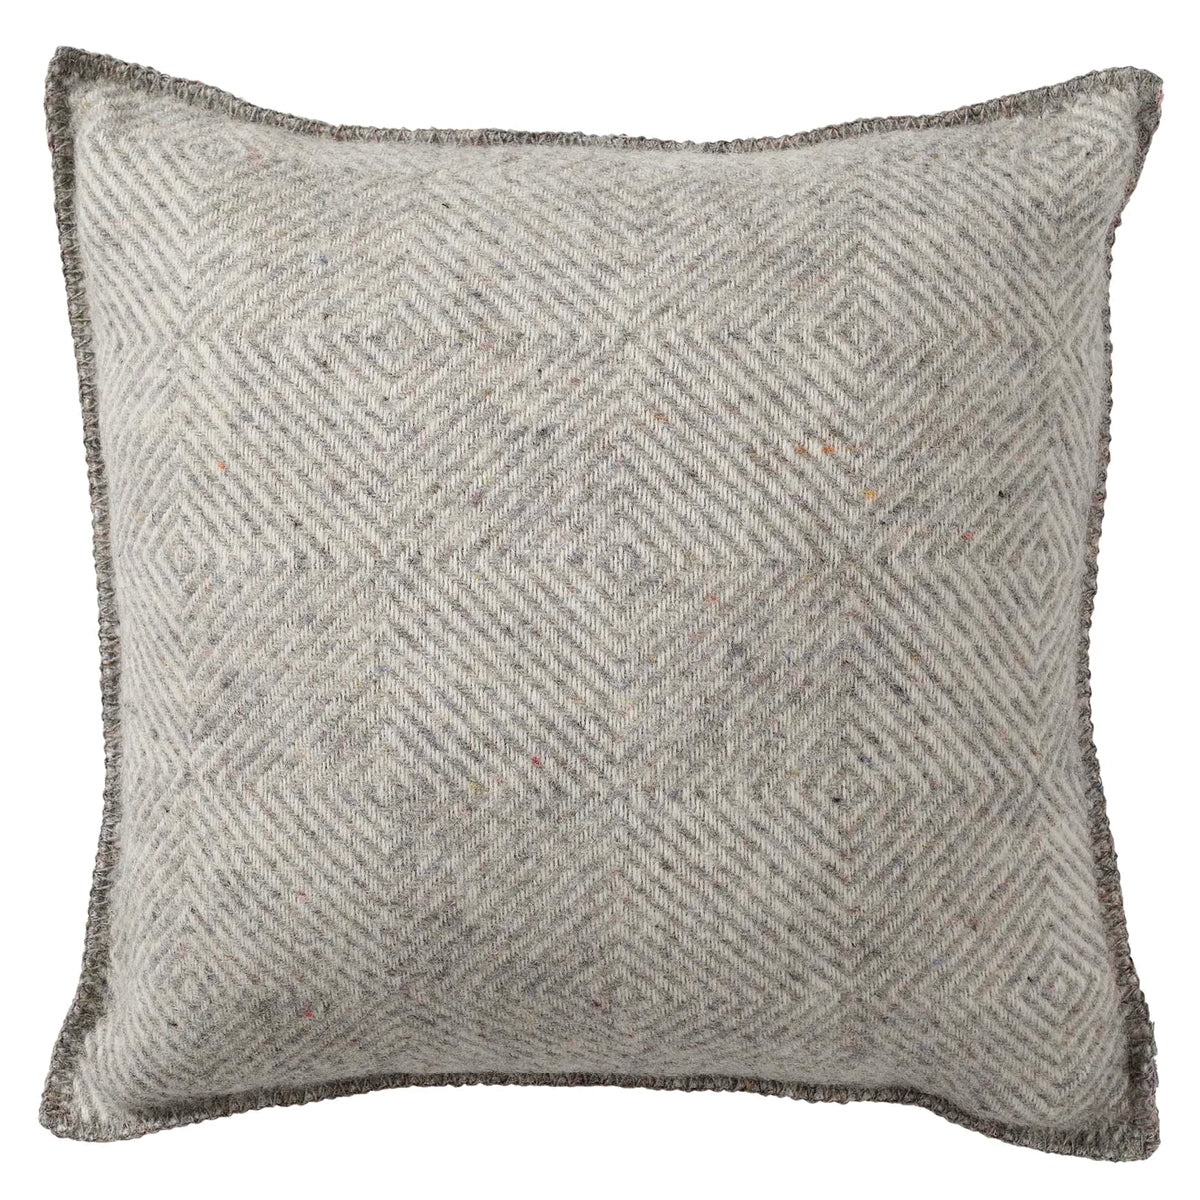 Get Extra Cushion with Lambs Wool 